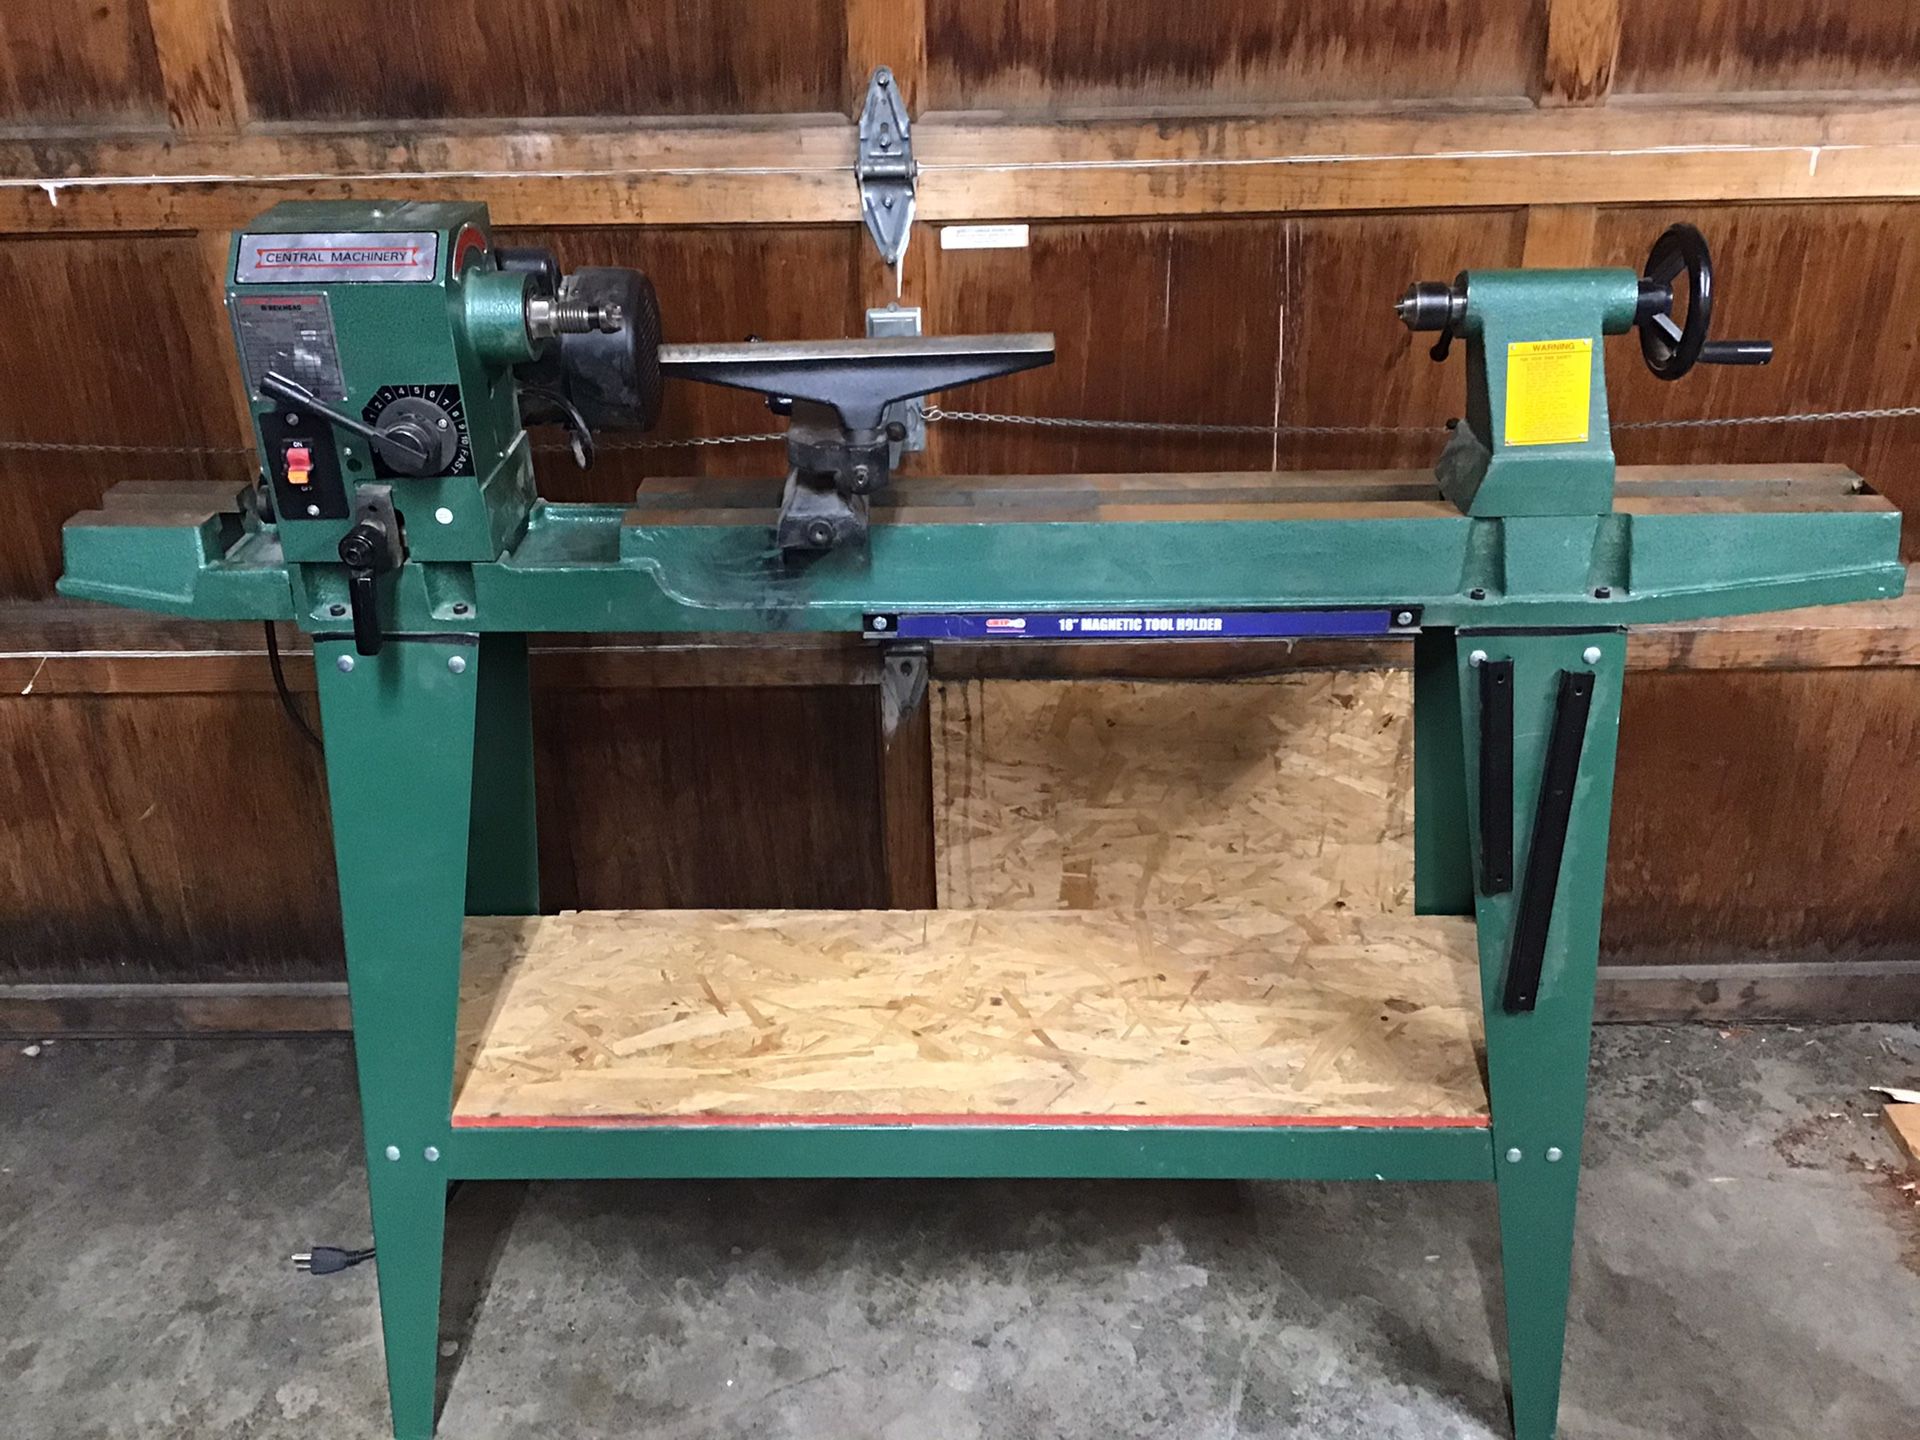 Central Machinery T34706 12” x 36” wood turning lathe - This unit sells new at Harbor Freight for $399 - don’t confuse with bench top model.